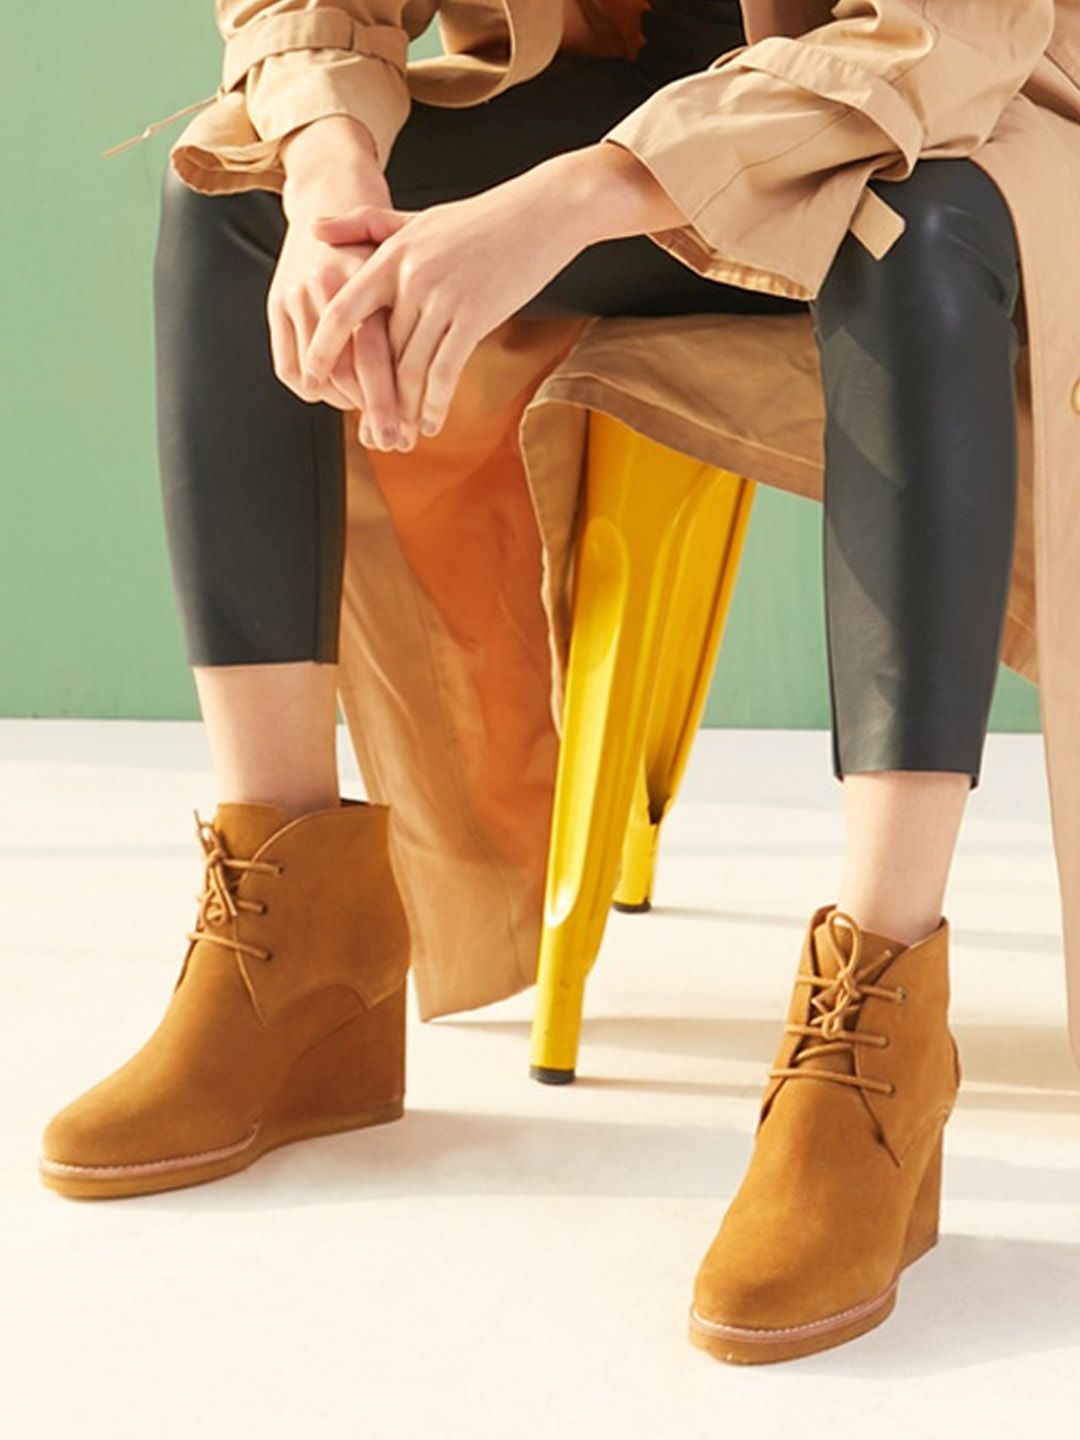 Saint G Tan Suede Leather Wedge Heeled Boots Price in India